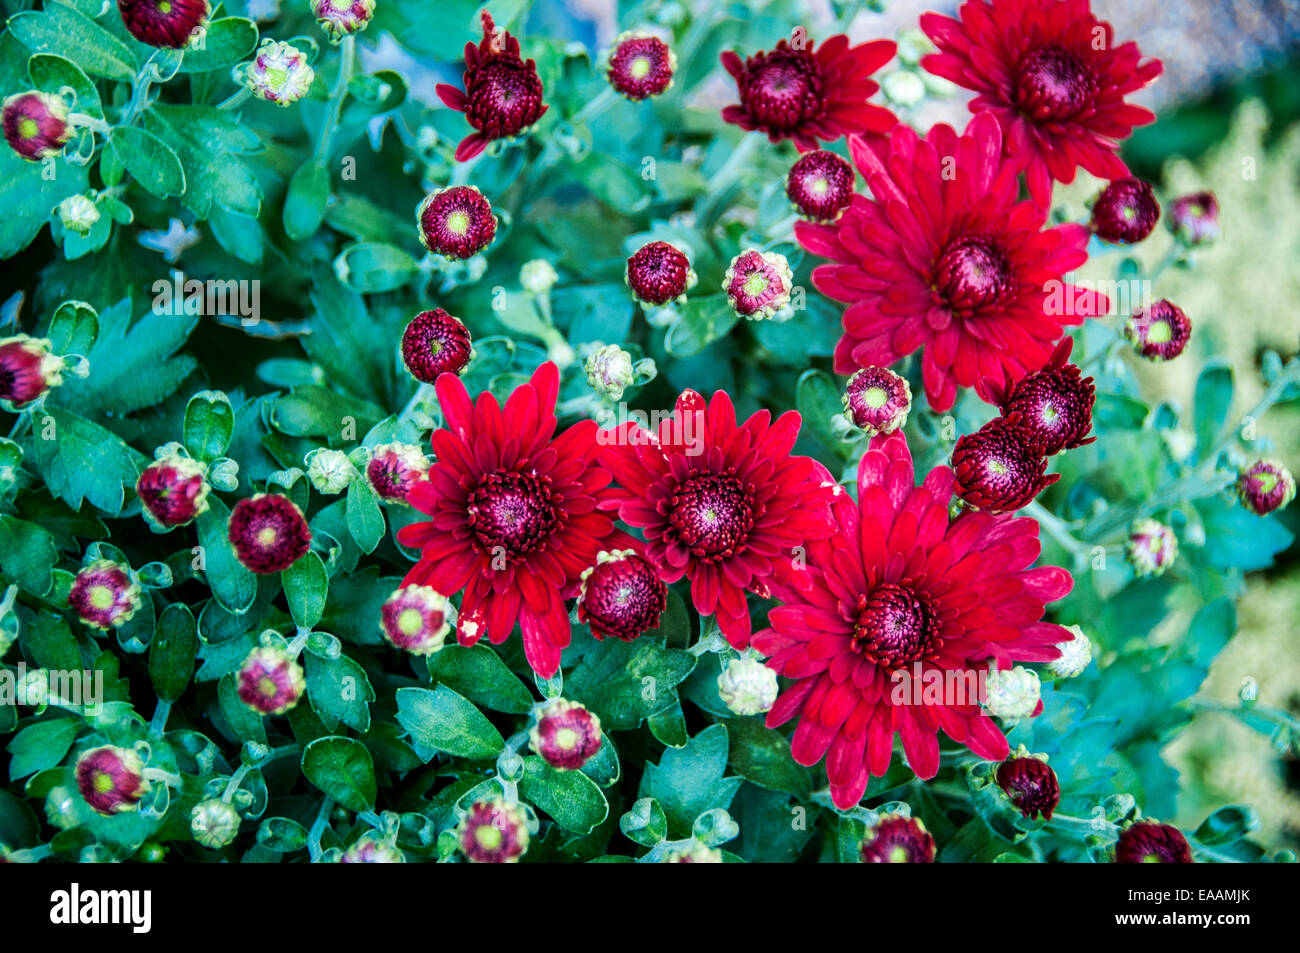 Filled frame top view of budding Mums and Mum flowers. Abstraction. Stock Photo